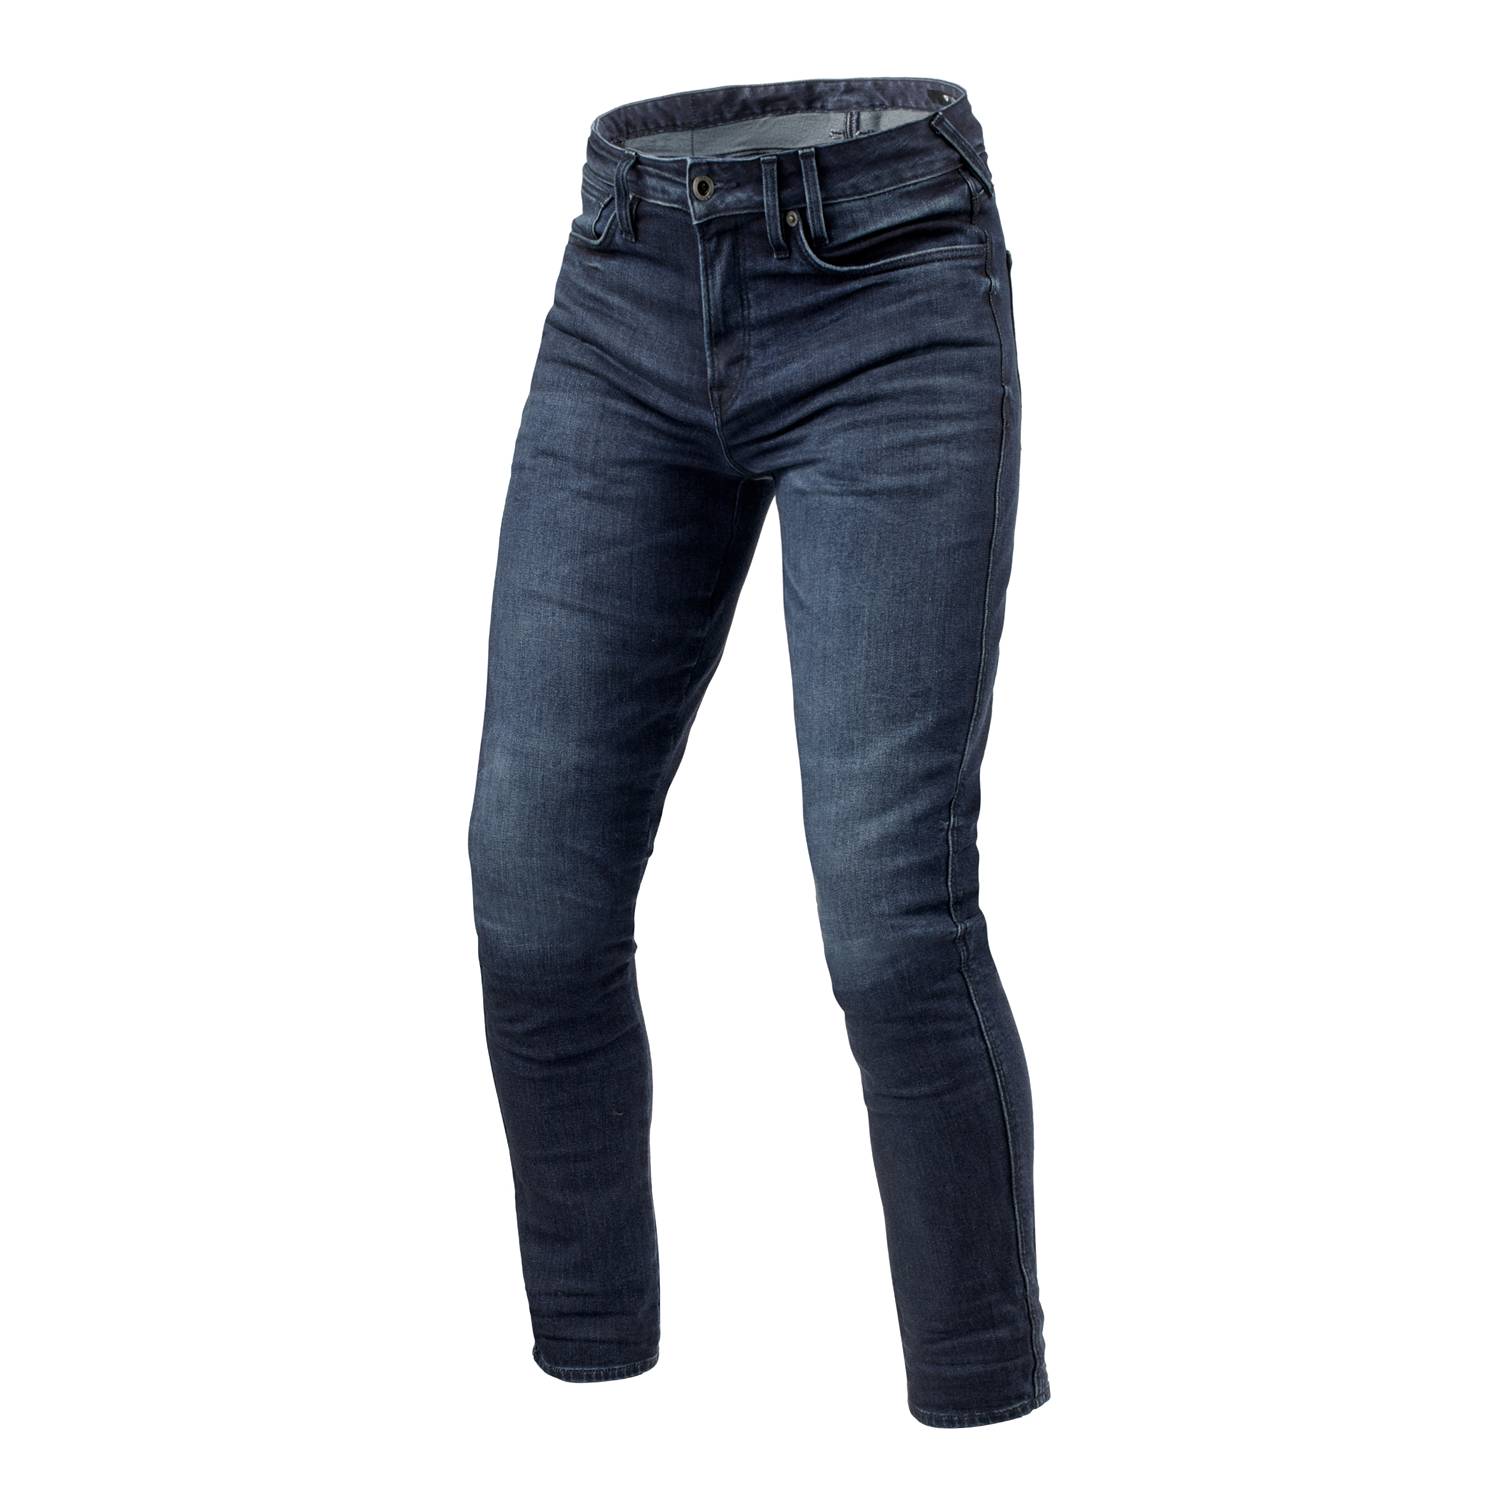 Image of EU REV'IT! Jeans Carlin SK Dark Blue Used L34 Motorcycle Jeans Taille L34/W36